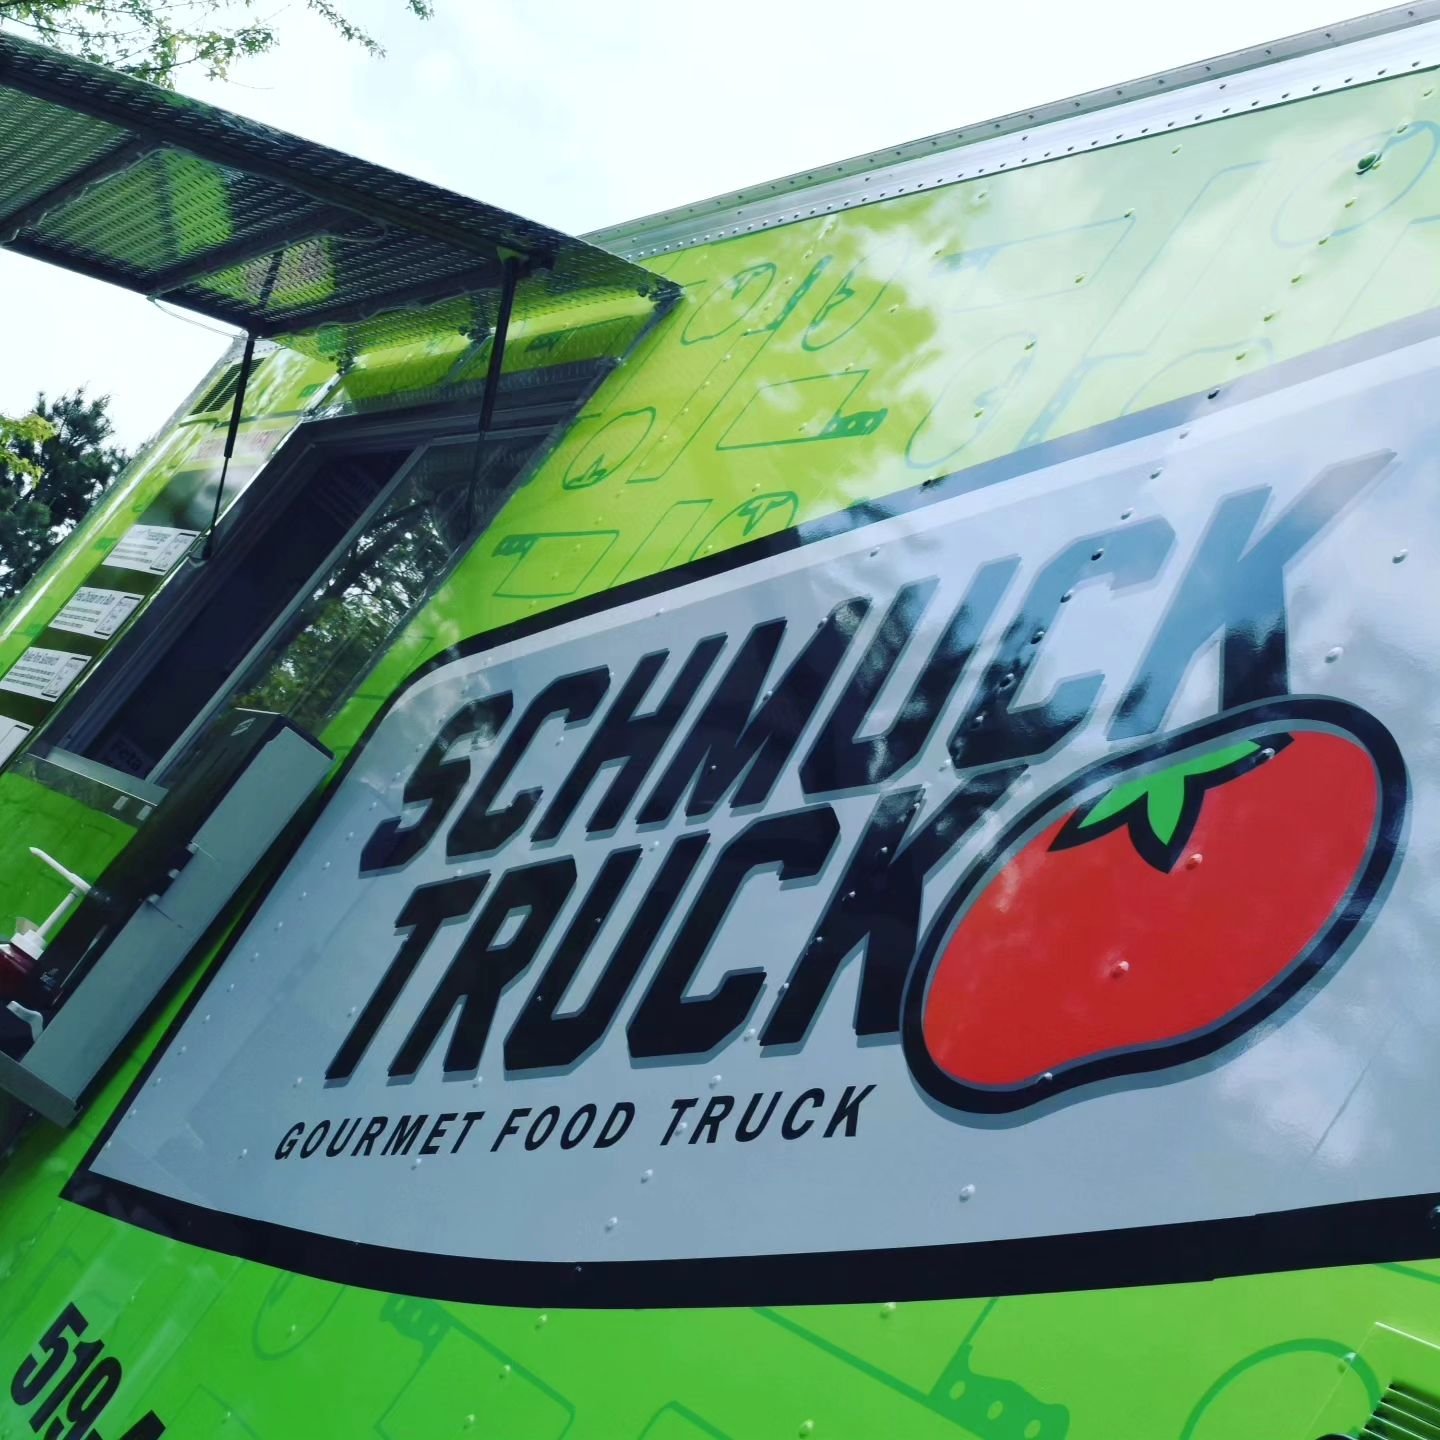 Windows Up Tonight!!

🗓 Tuesday May 14th
⛪️St. Luke's United Church 
📍1620 Franklin Blvd, Cambridge 
⏰️430pm-8pm 

Can't wait to see you all for dinner tonight at our first night back at St Luke's! What are you gonna get?!

#foodtruckseason #instaf